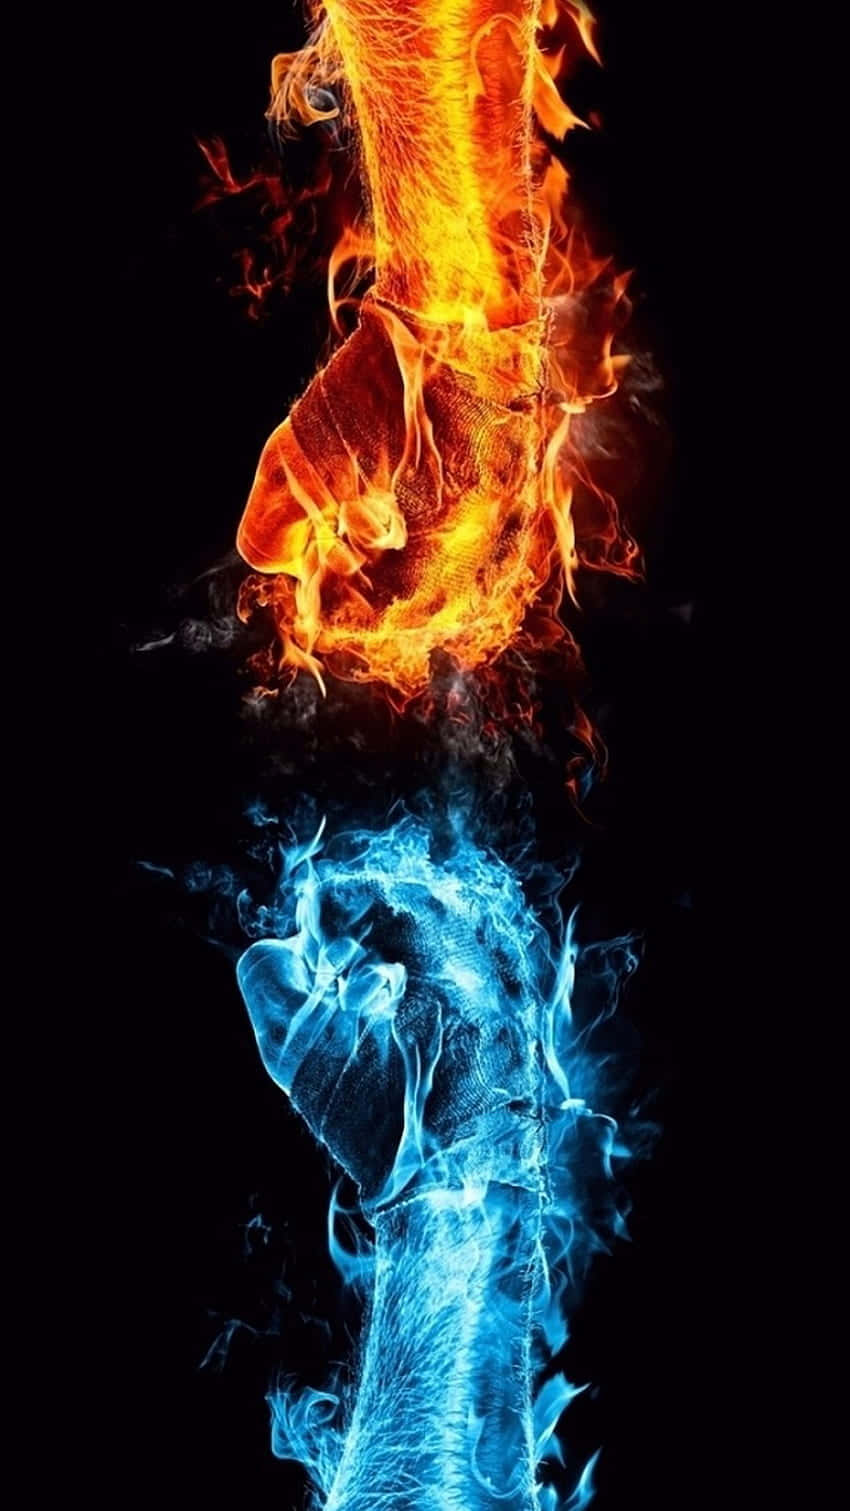 Intense Red and Blue Fire Wallpaper